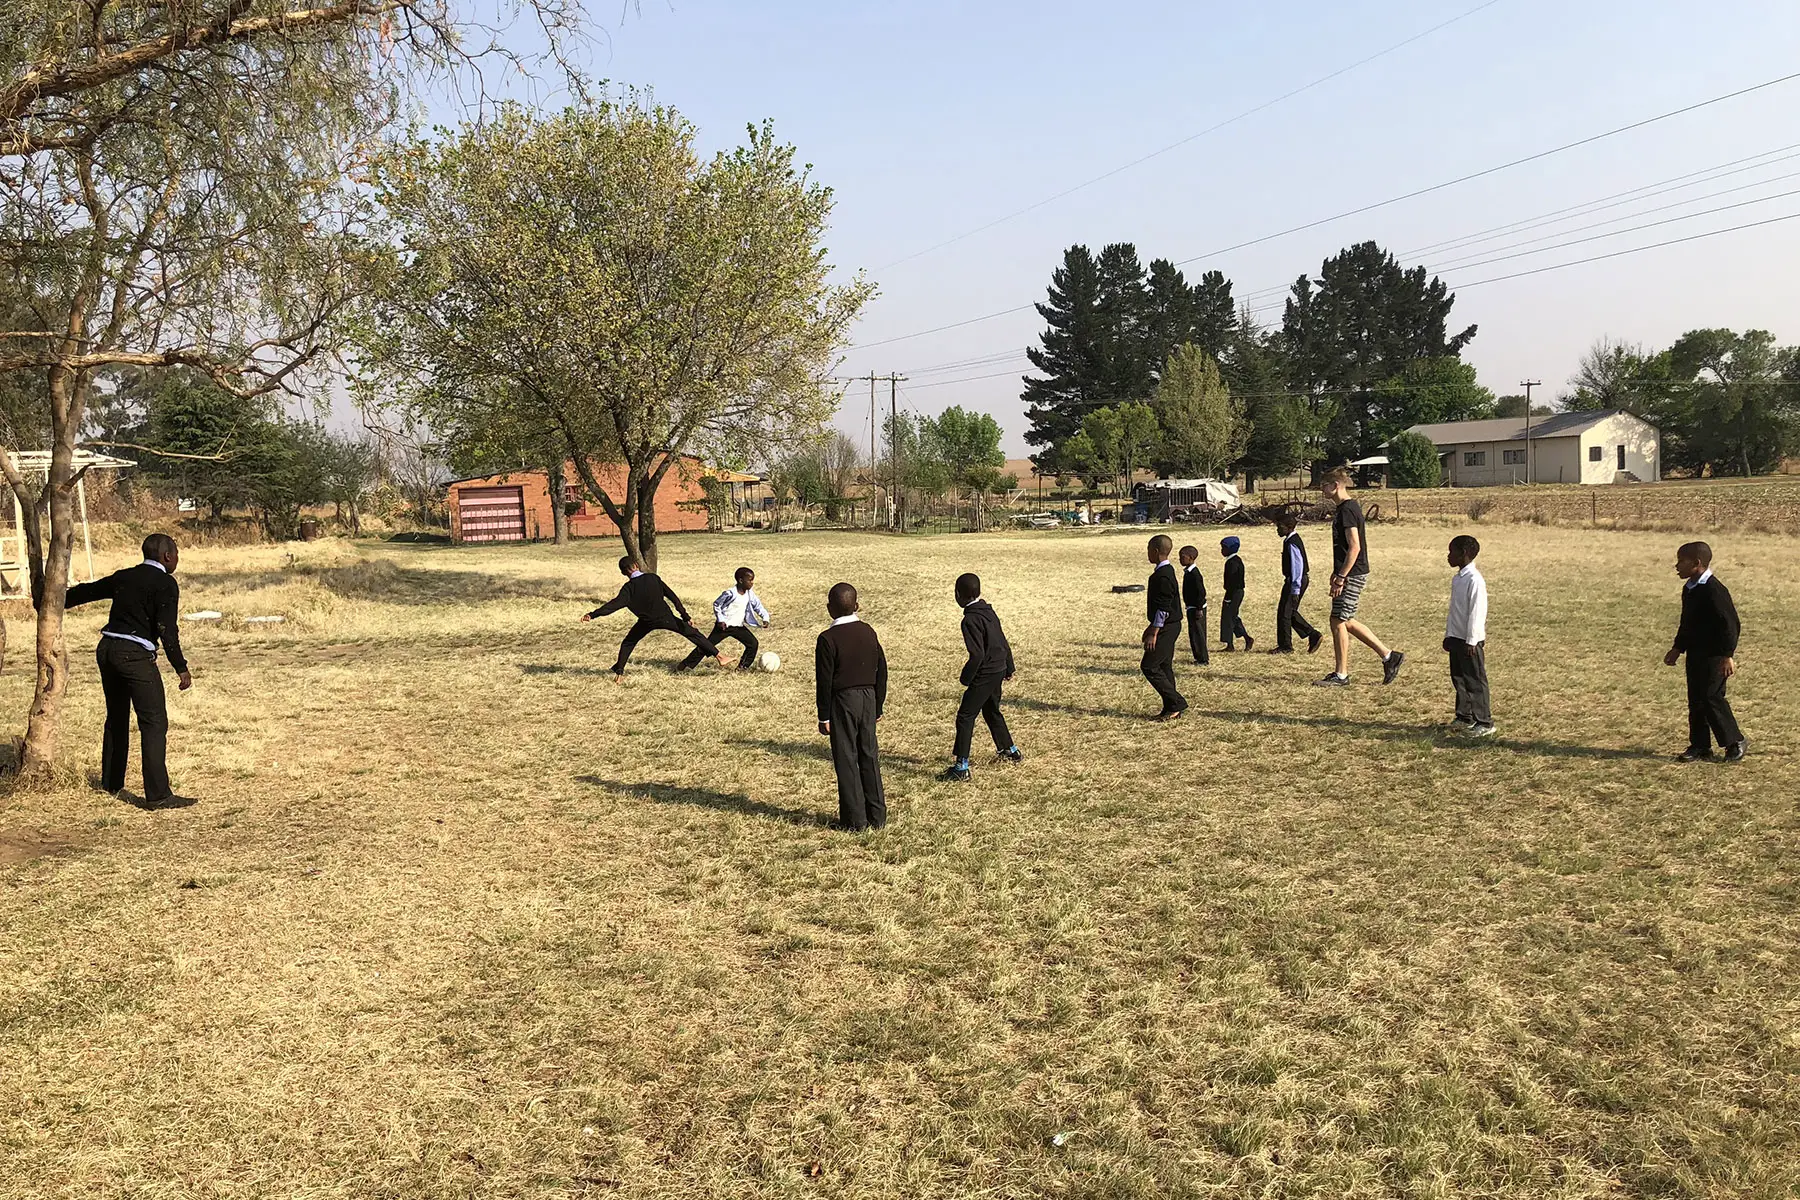 Primary schoolchildren playing football in South Africa